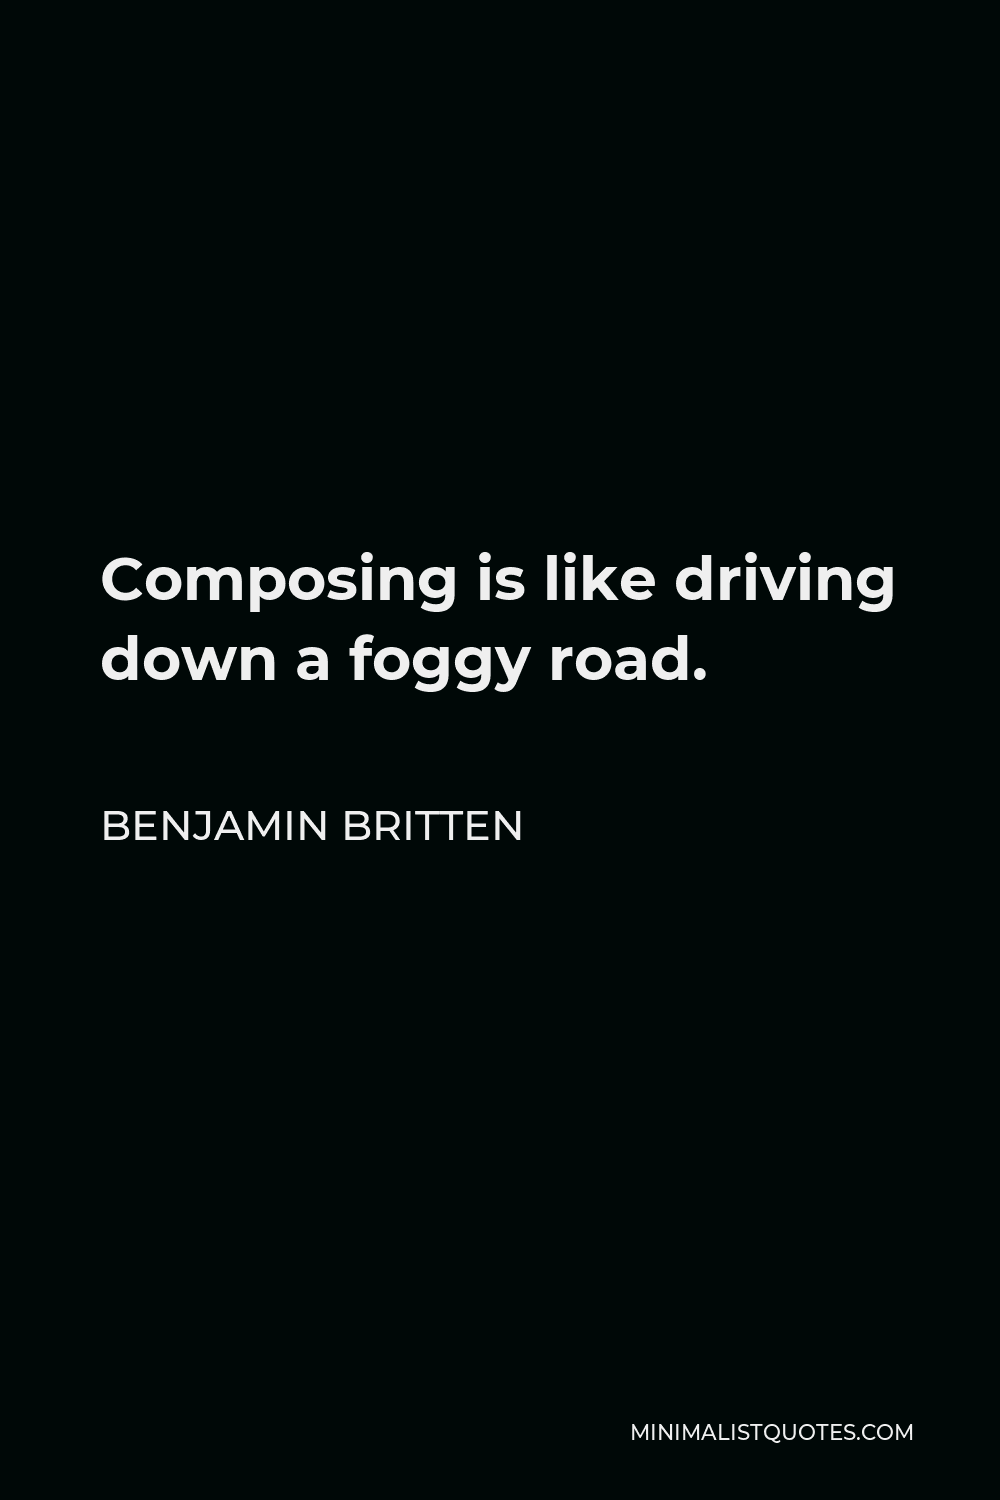 Benjamin Britten Quote - Composing is like driving down a foggy road.